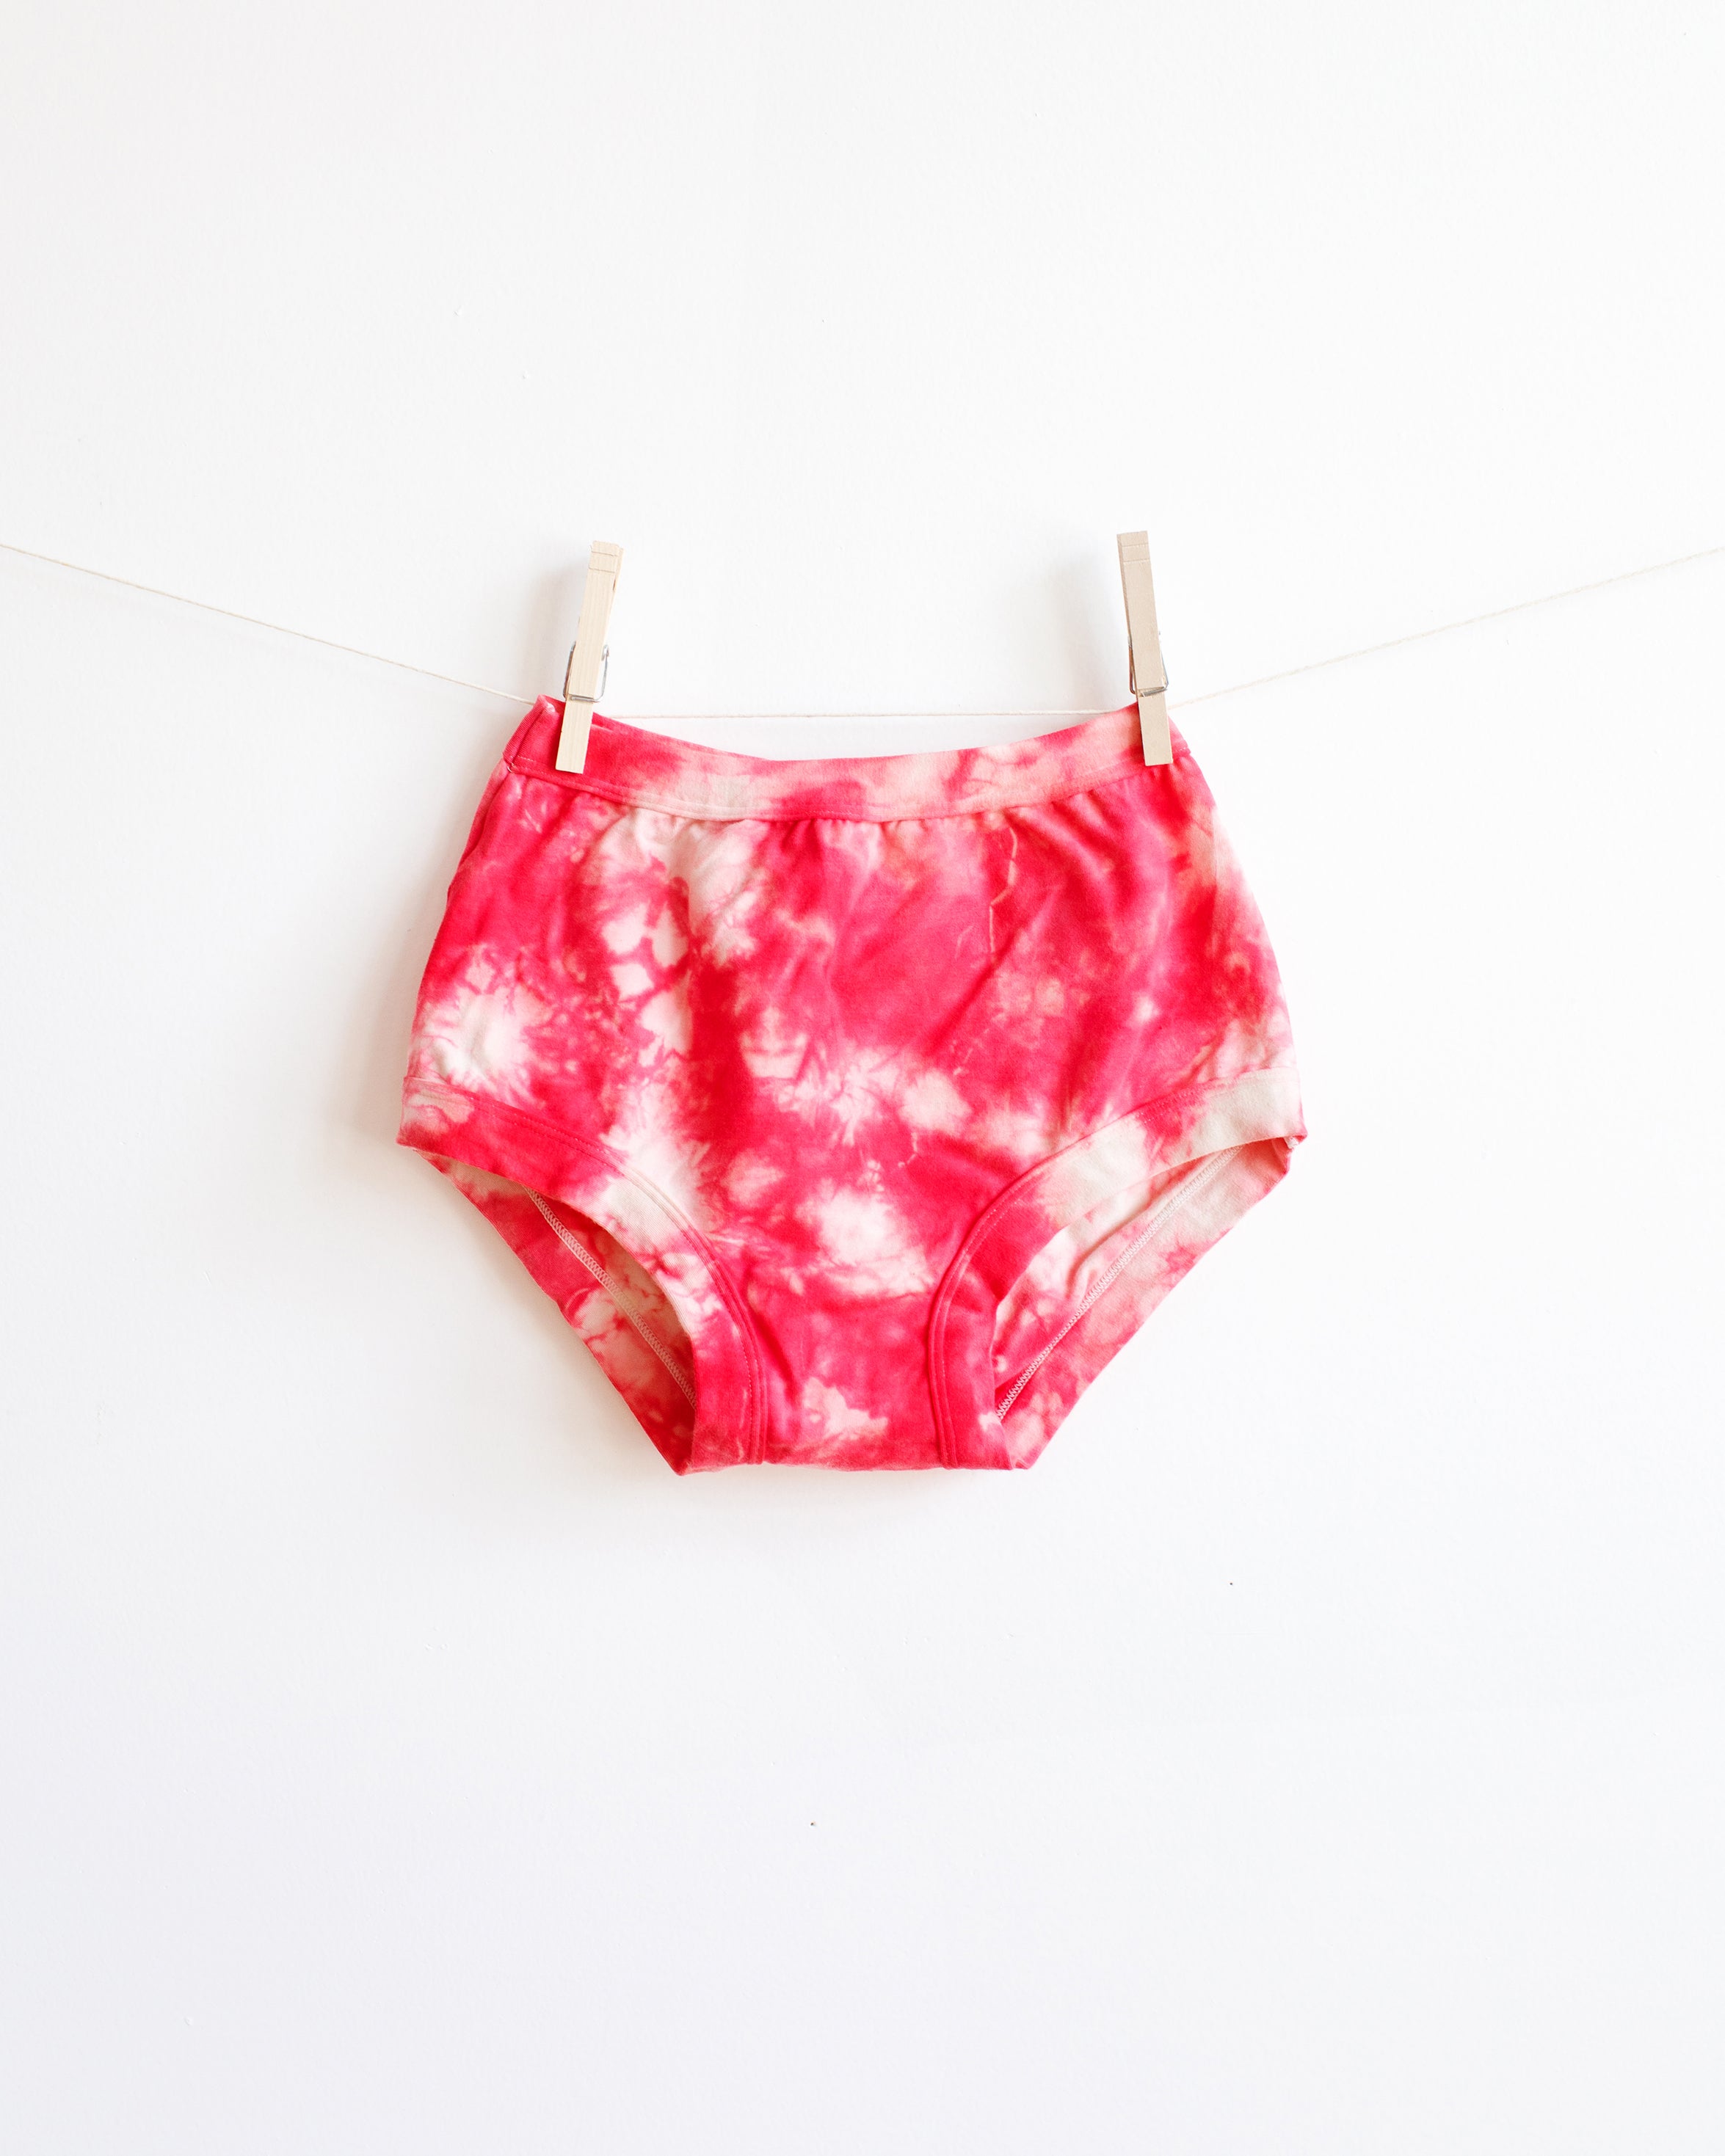 Hanging Thunderpants Sky Rise style underwear with red and white scrunch dye on a white background.